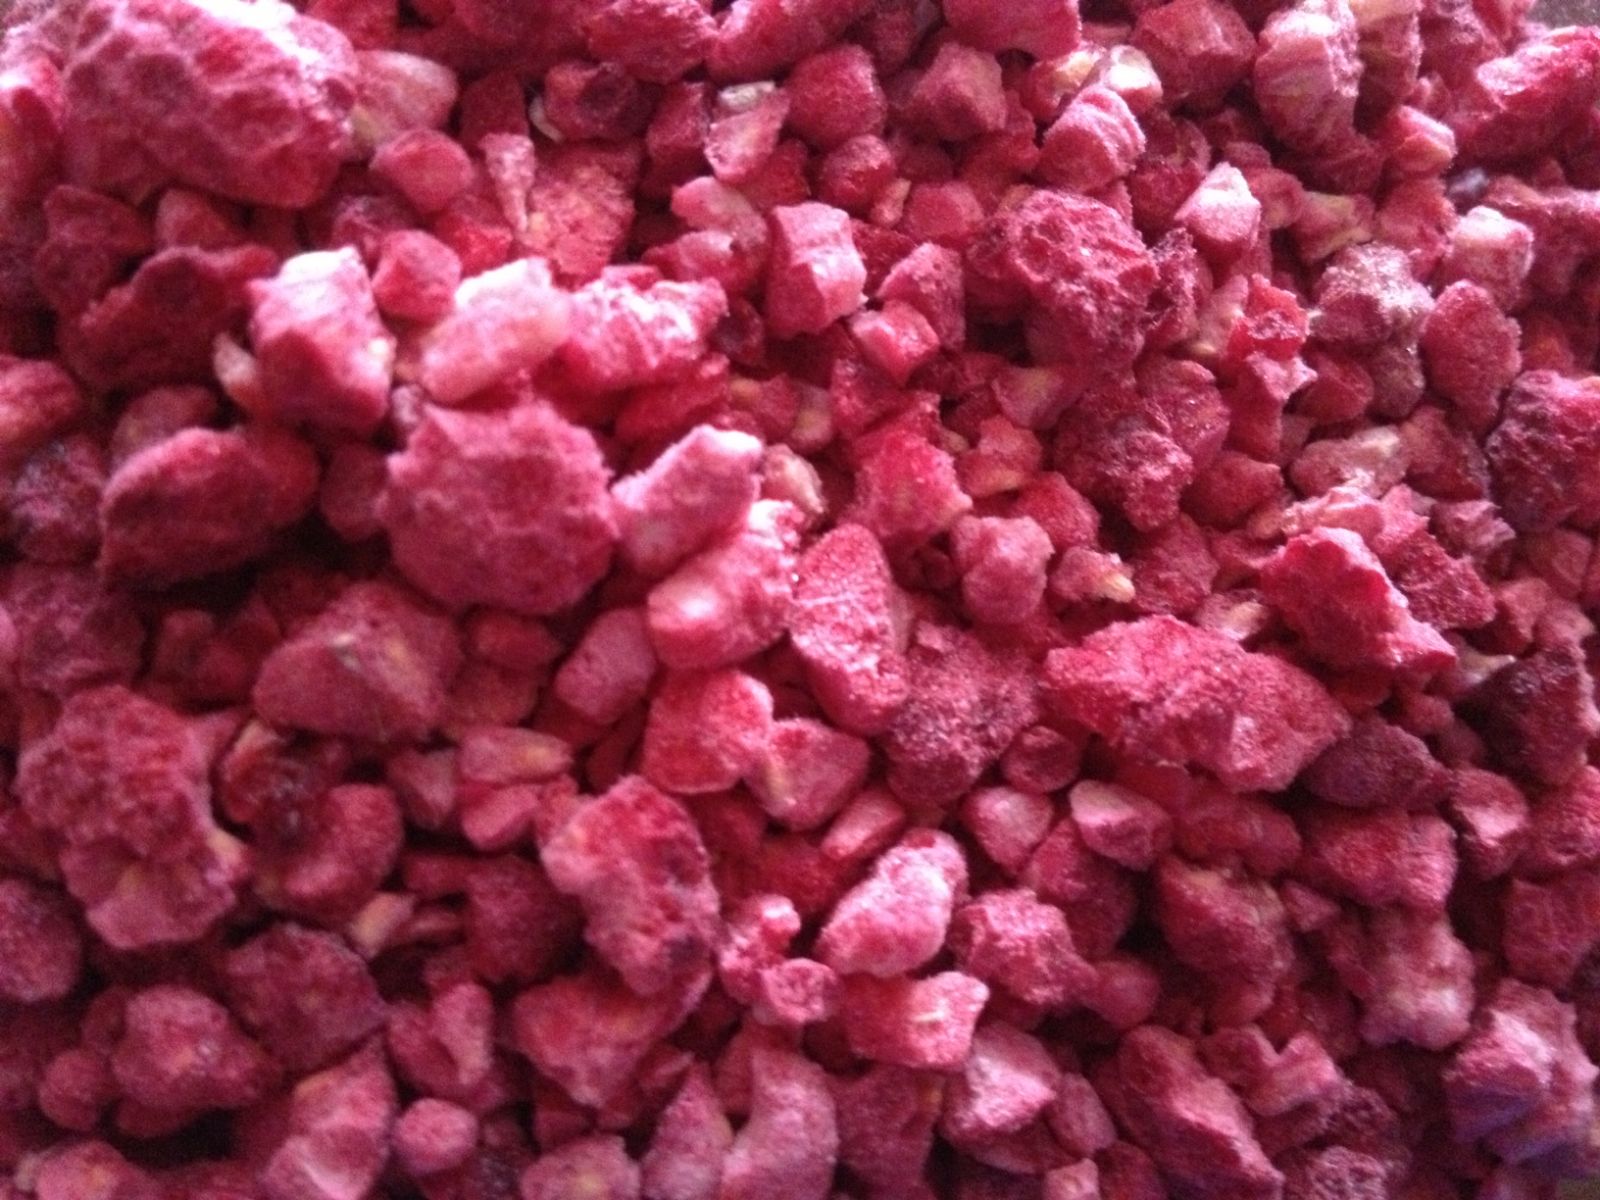 Australian grown & Manufactured Freeze Dried raspberry pieces by The Melbourne Food Depot, Melbourne, Australia